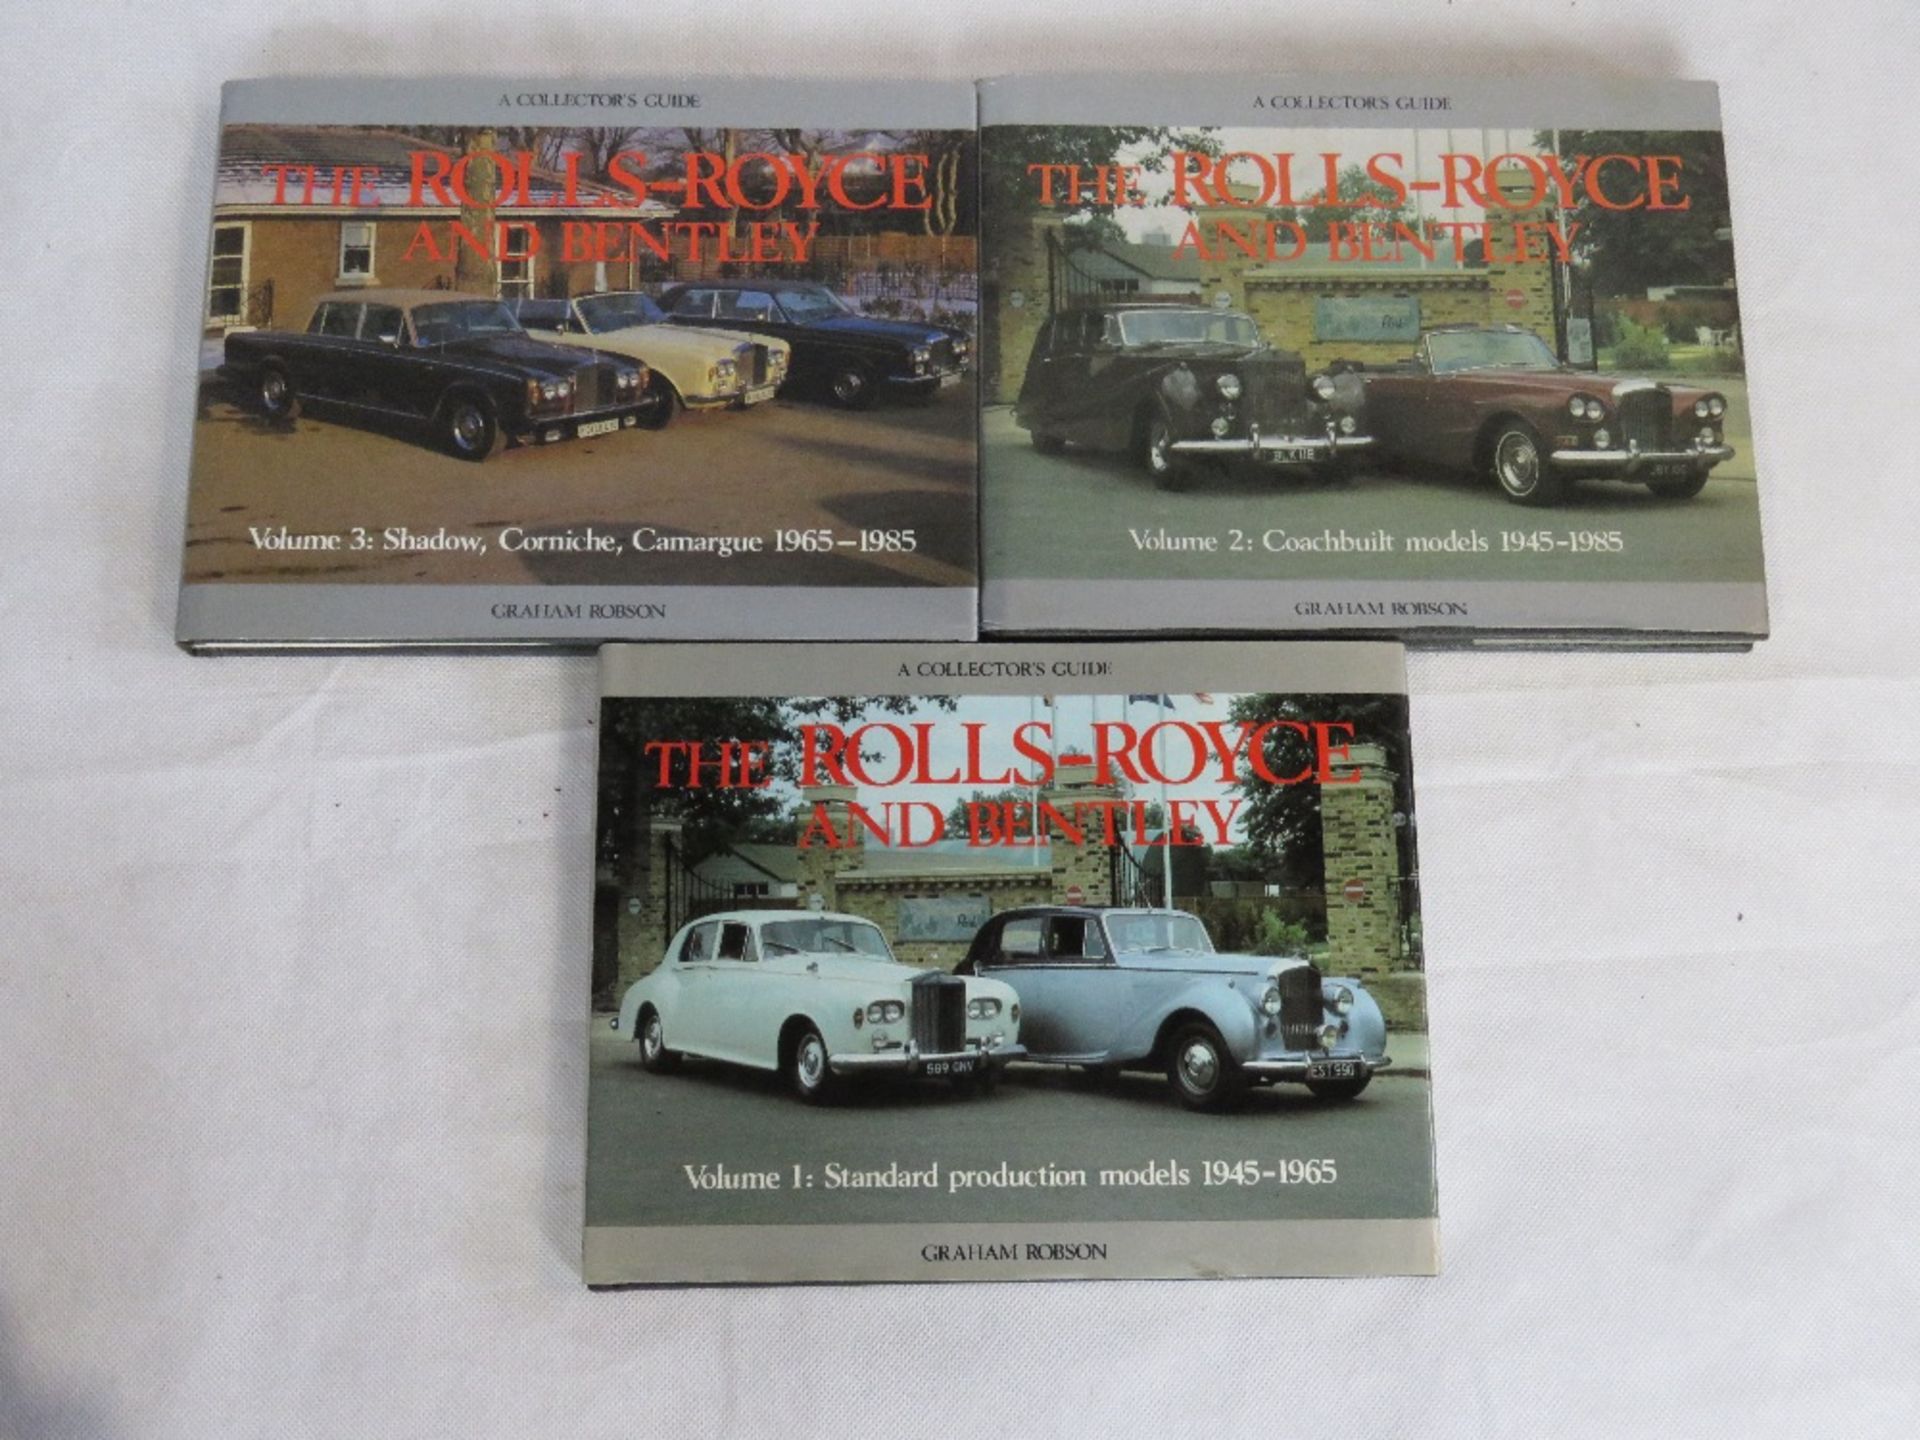 The Rolls-Royce and Bentley collectors guide in three volumes.